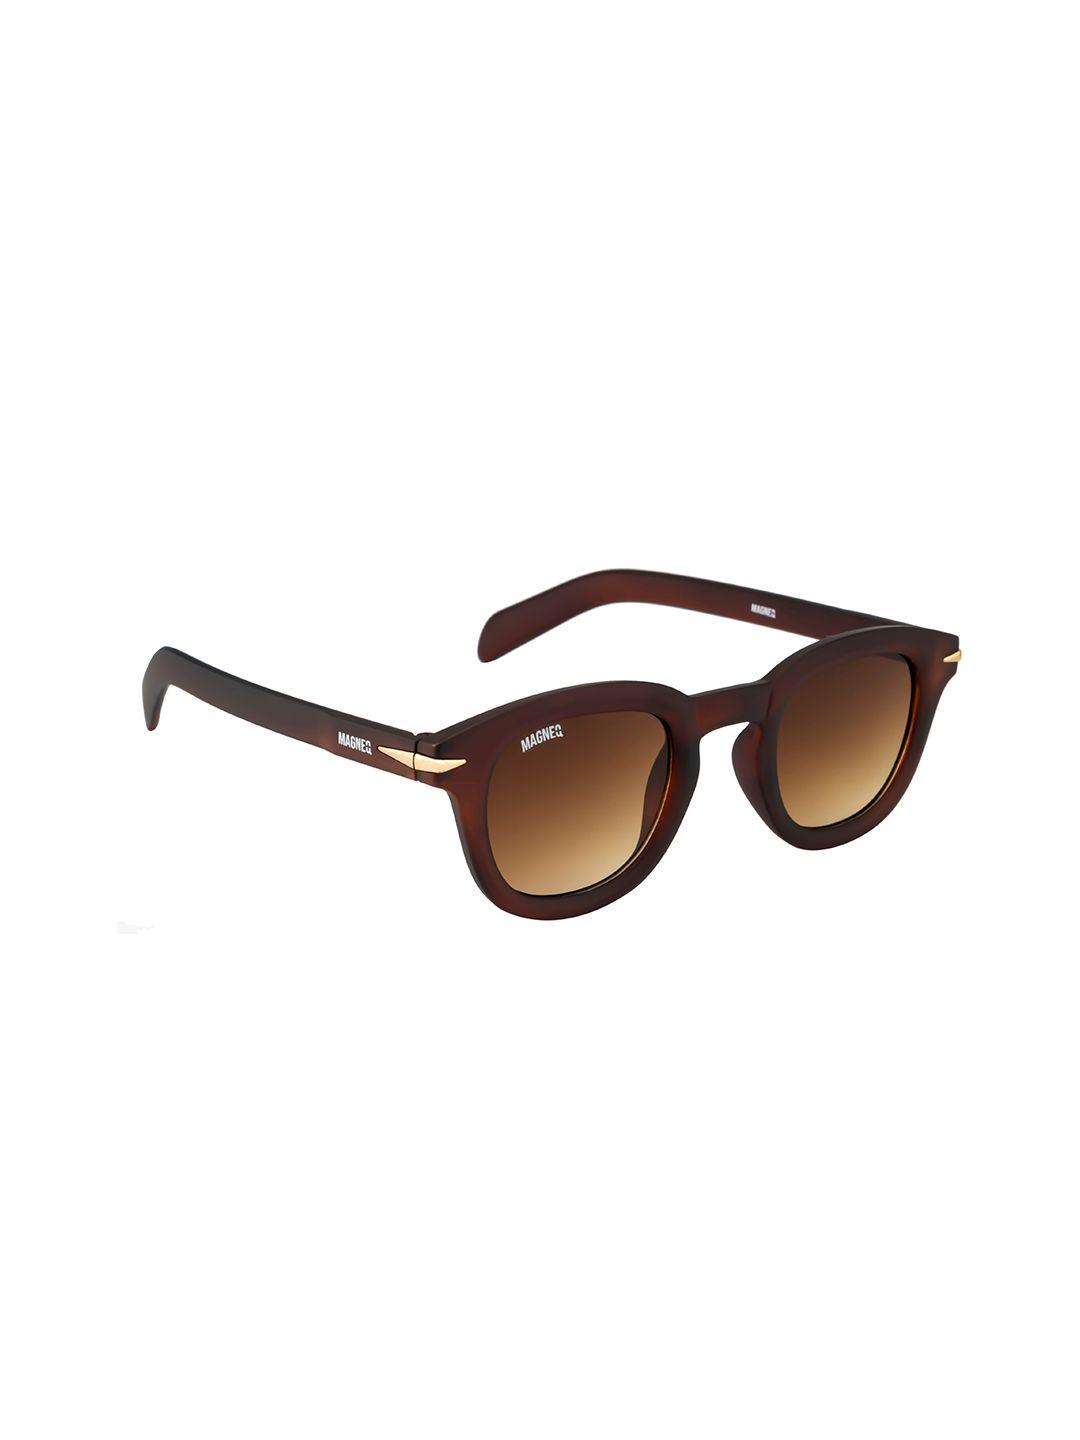 magneq brown lens & brown round sunglasses with polarised lens mg 2185/s c4 4618